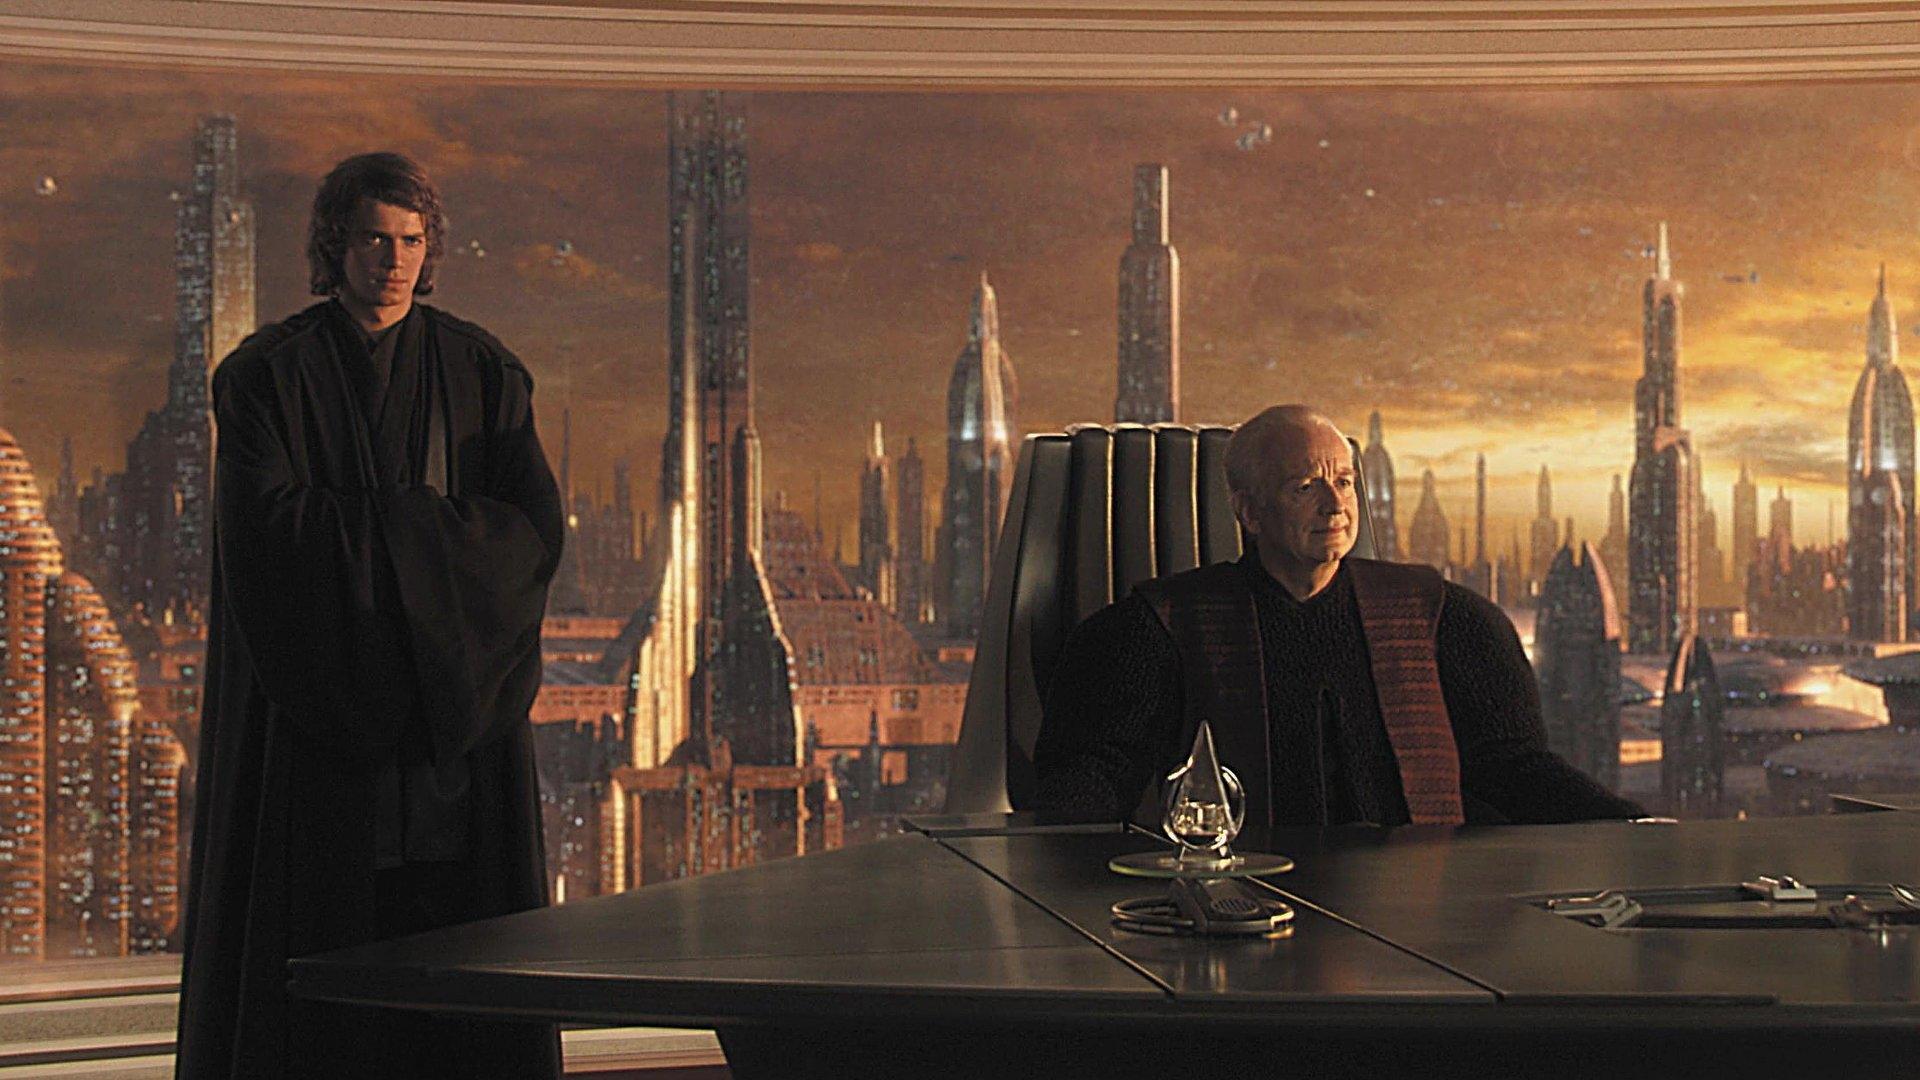 Star Wars Episode III - Revenge Of The Sith wallpapers HD.